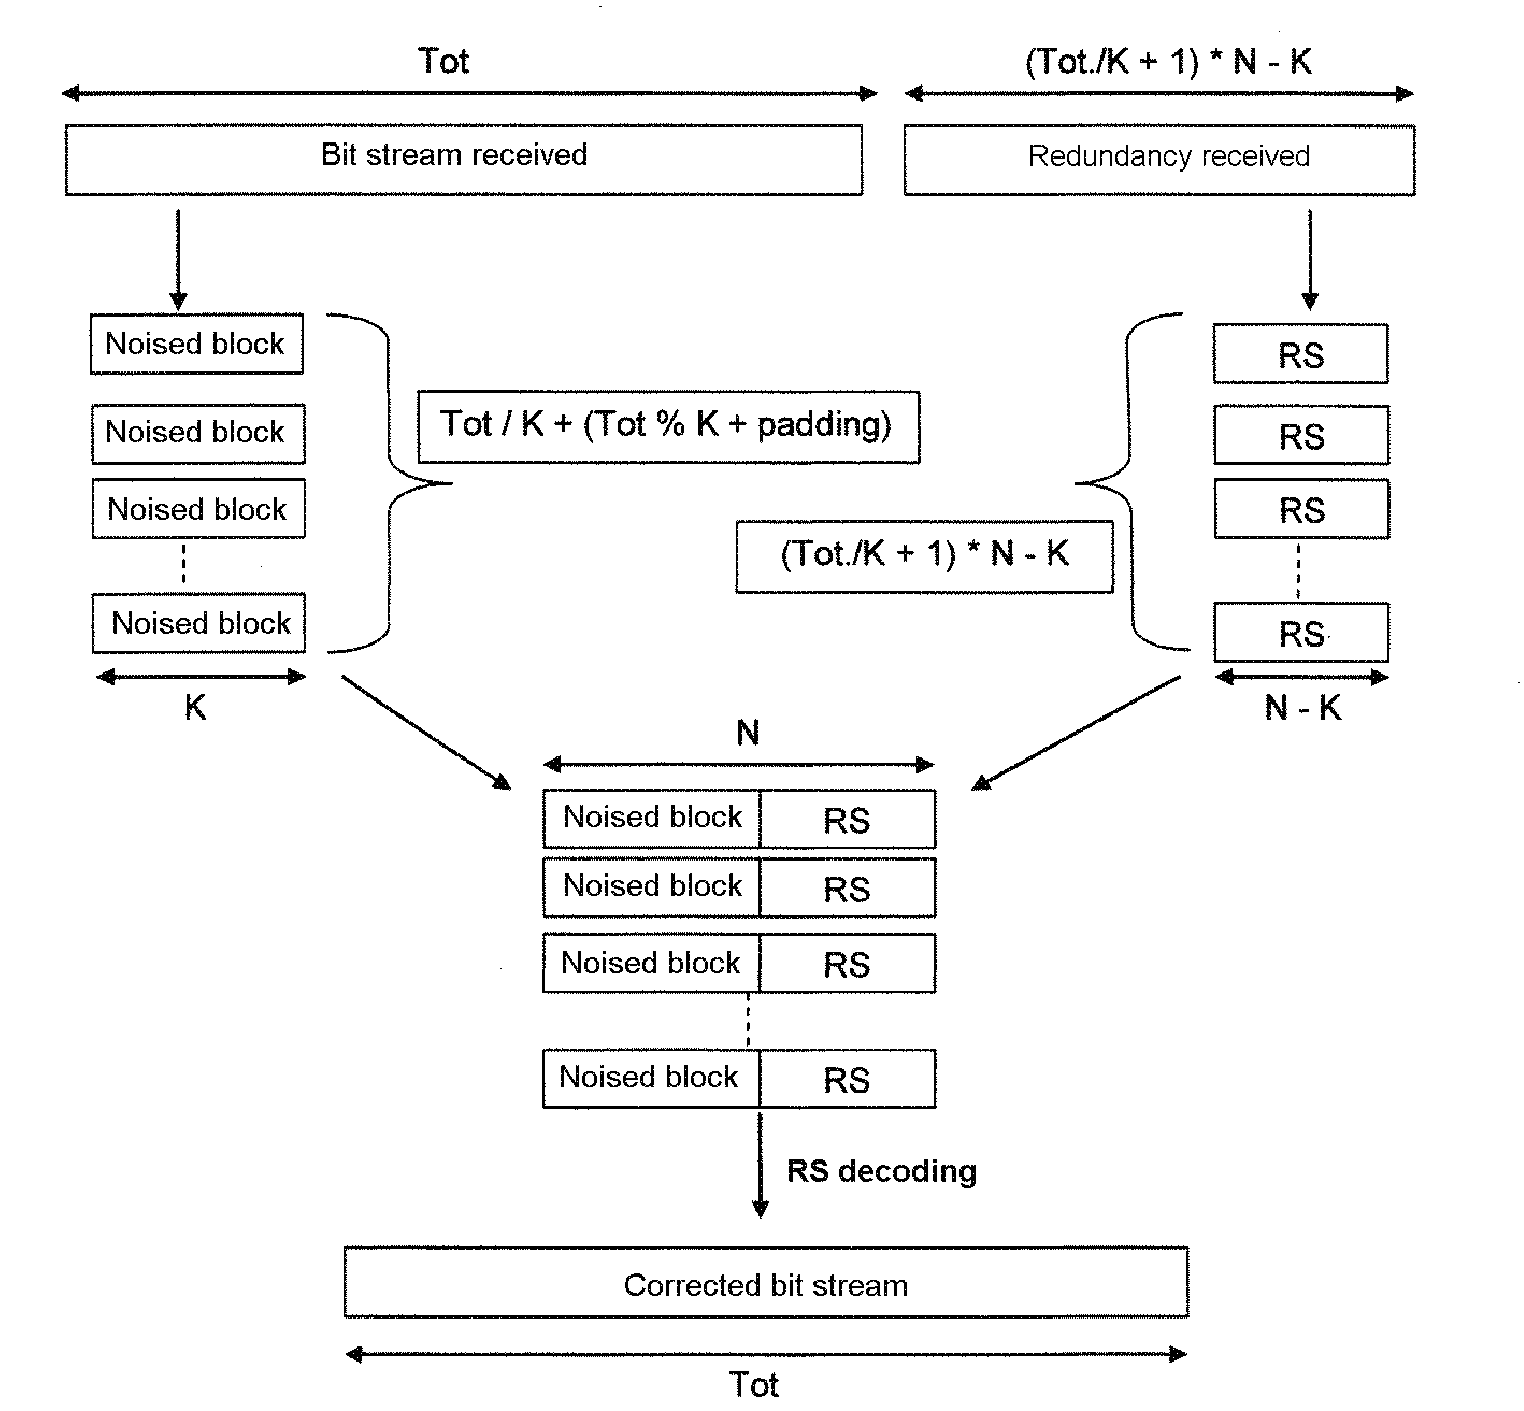 Method for protecting multimedia data using additional network abstraction layers (NAL)